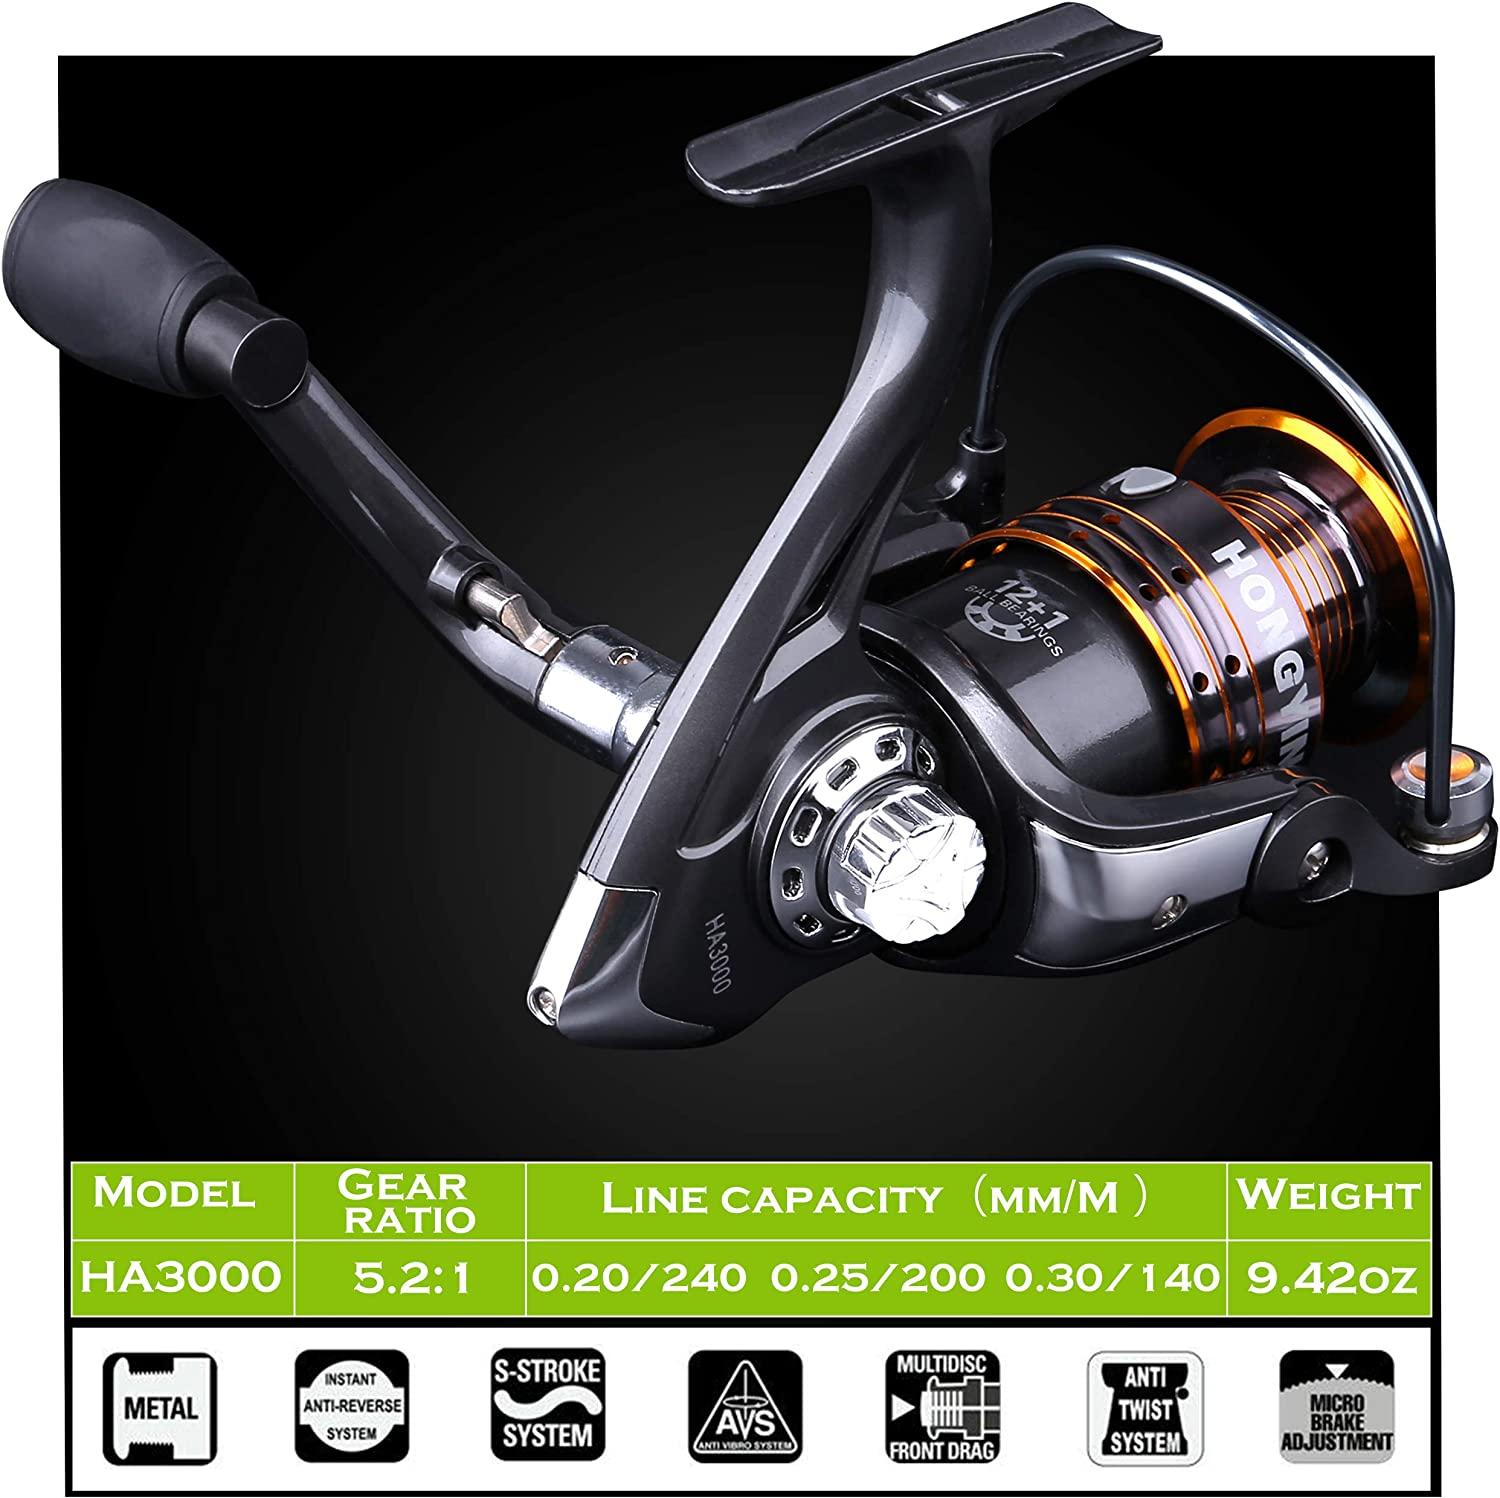 PLUSINNO Fishing Rod and Reel Combos - Carbon Fiber Telescopic Fishing Pole  - Spinning Reel 12 +1 Shielded Bearings Stainless Steel BB X-Full Kit With Carrier  Bag 2.7M 8.86FT